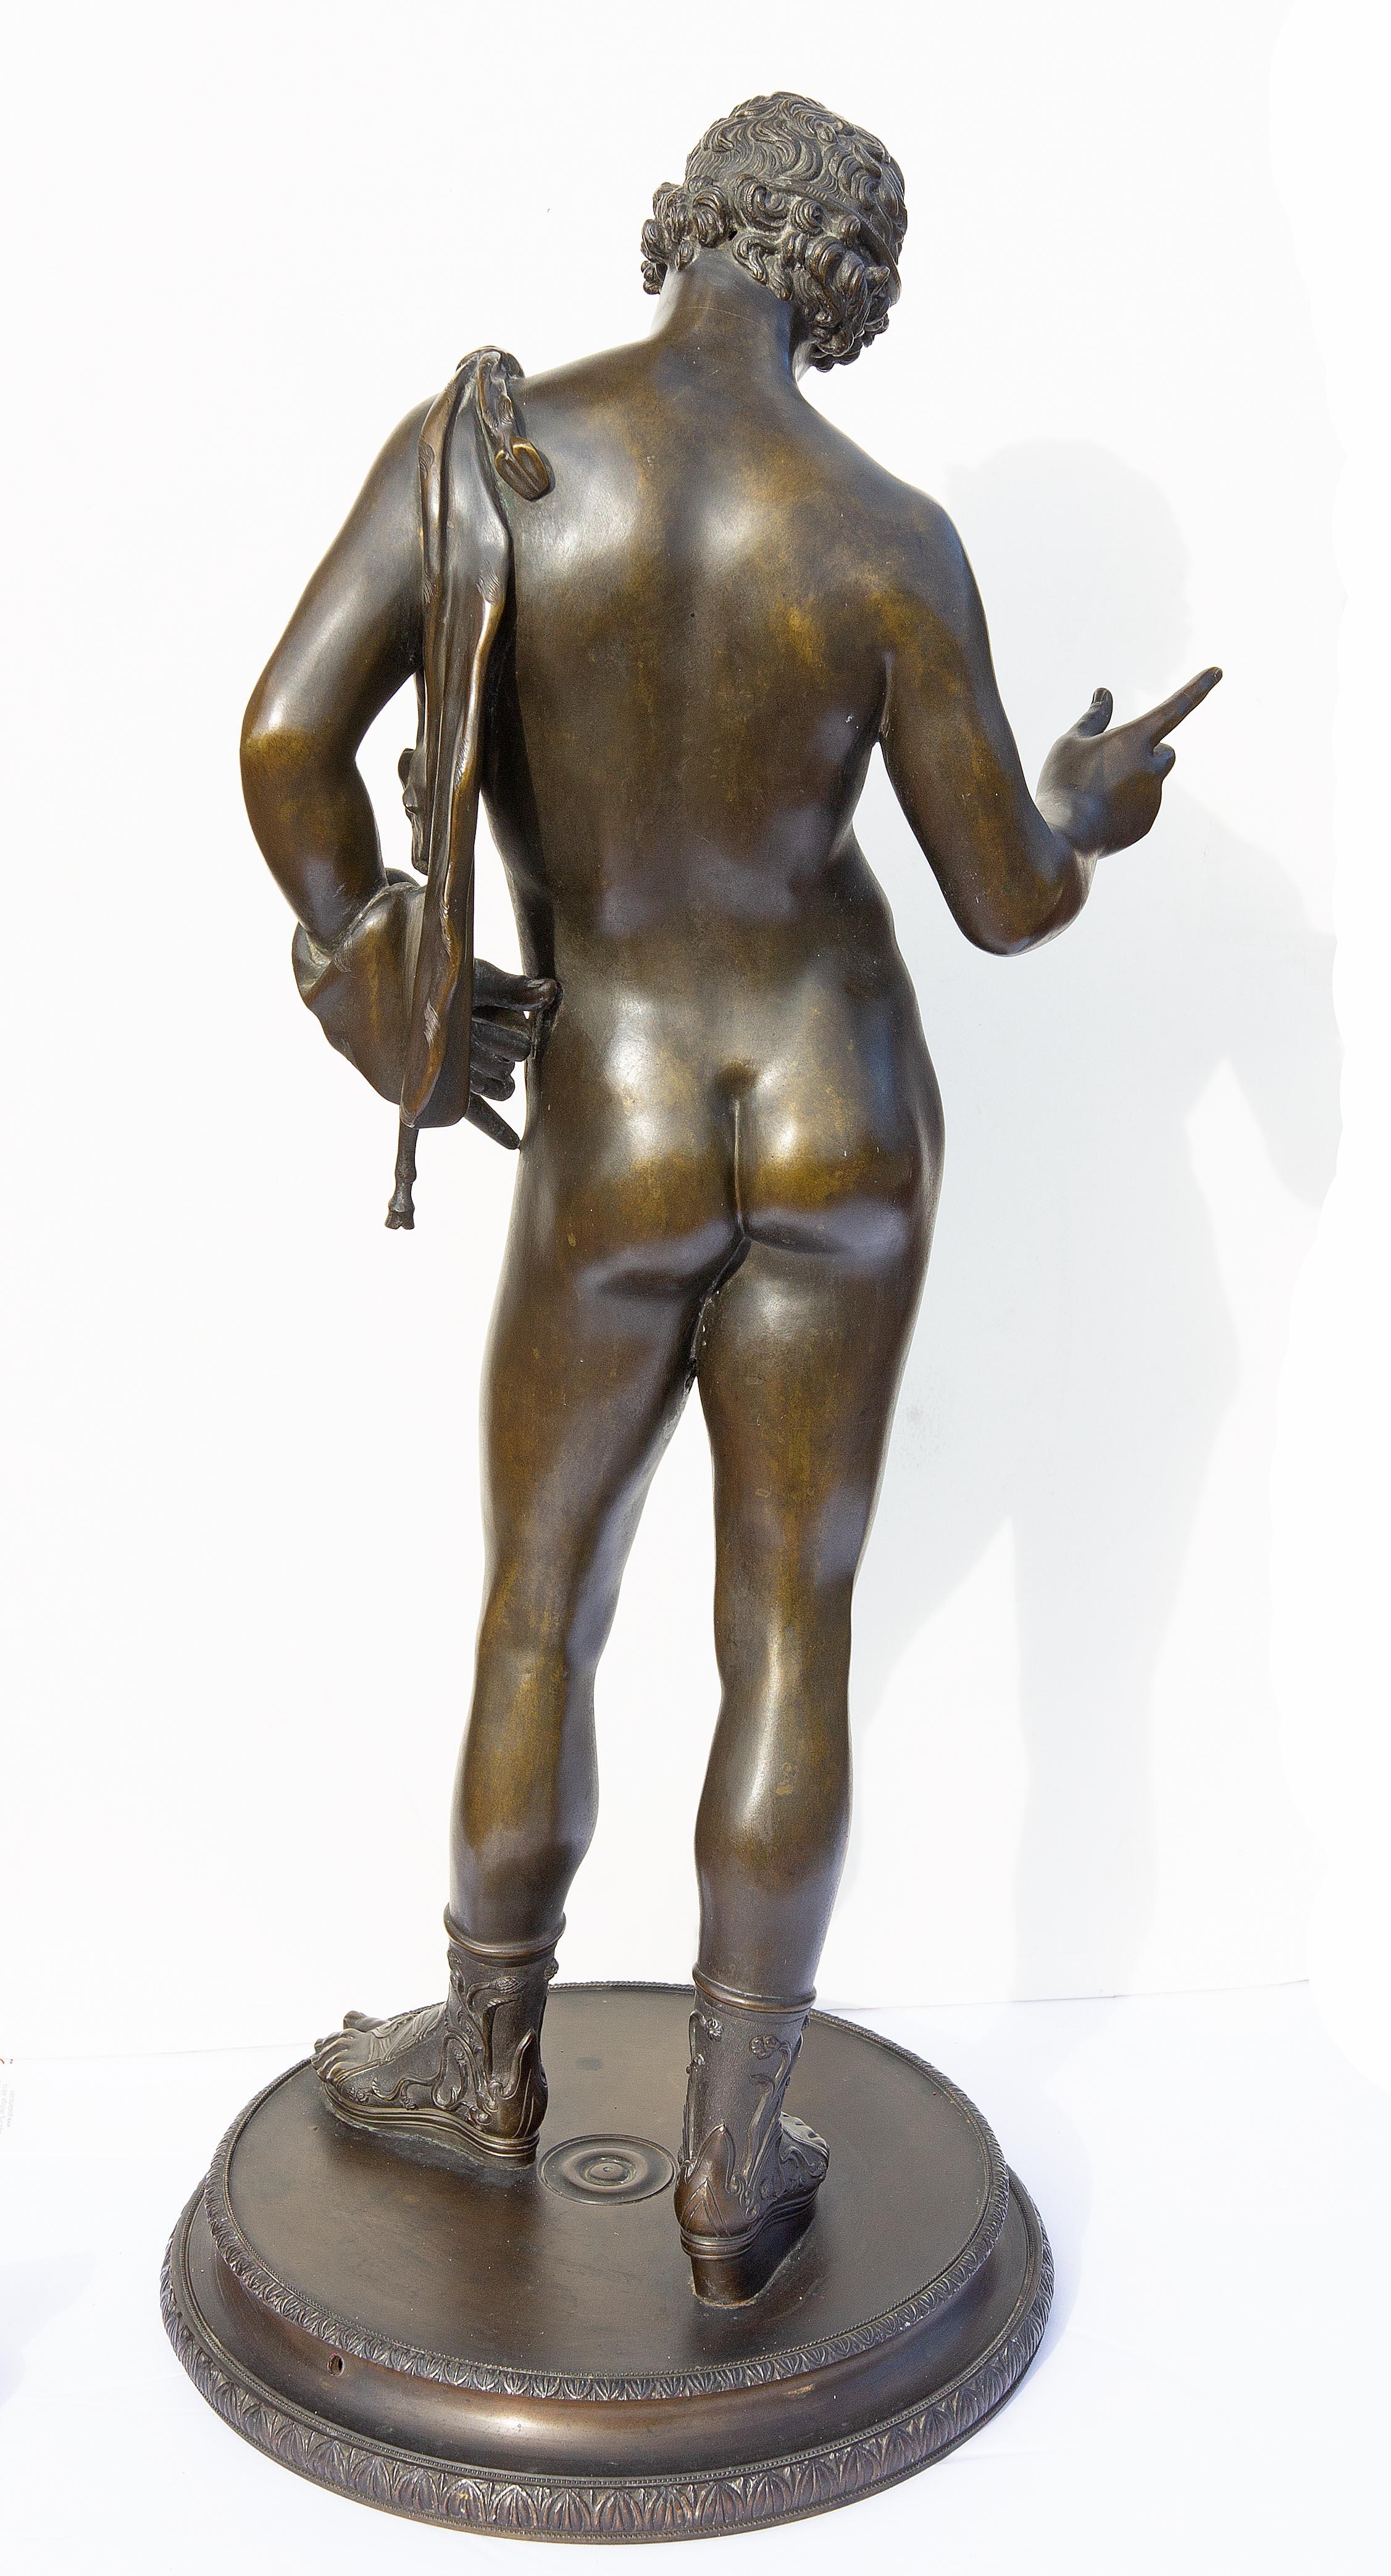 Grand Tour 19th century bronze sculpture of Narcissus after the original found in 1862 at Pompeii. When first found in Pompeii it was identified as Narcissus. Years later it was identified as Dionysus. Excellent quality.